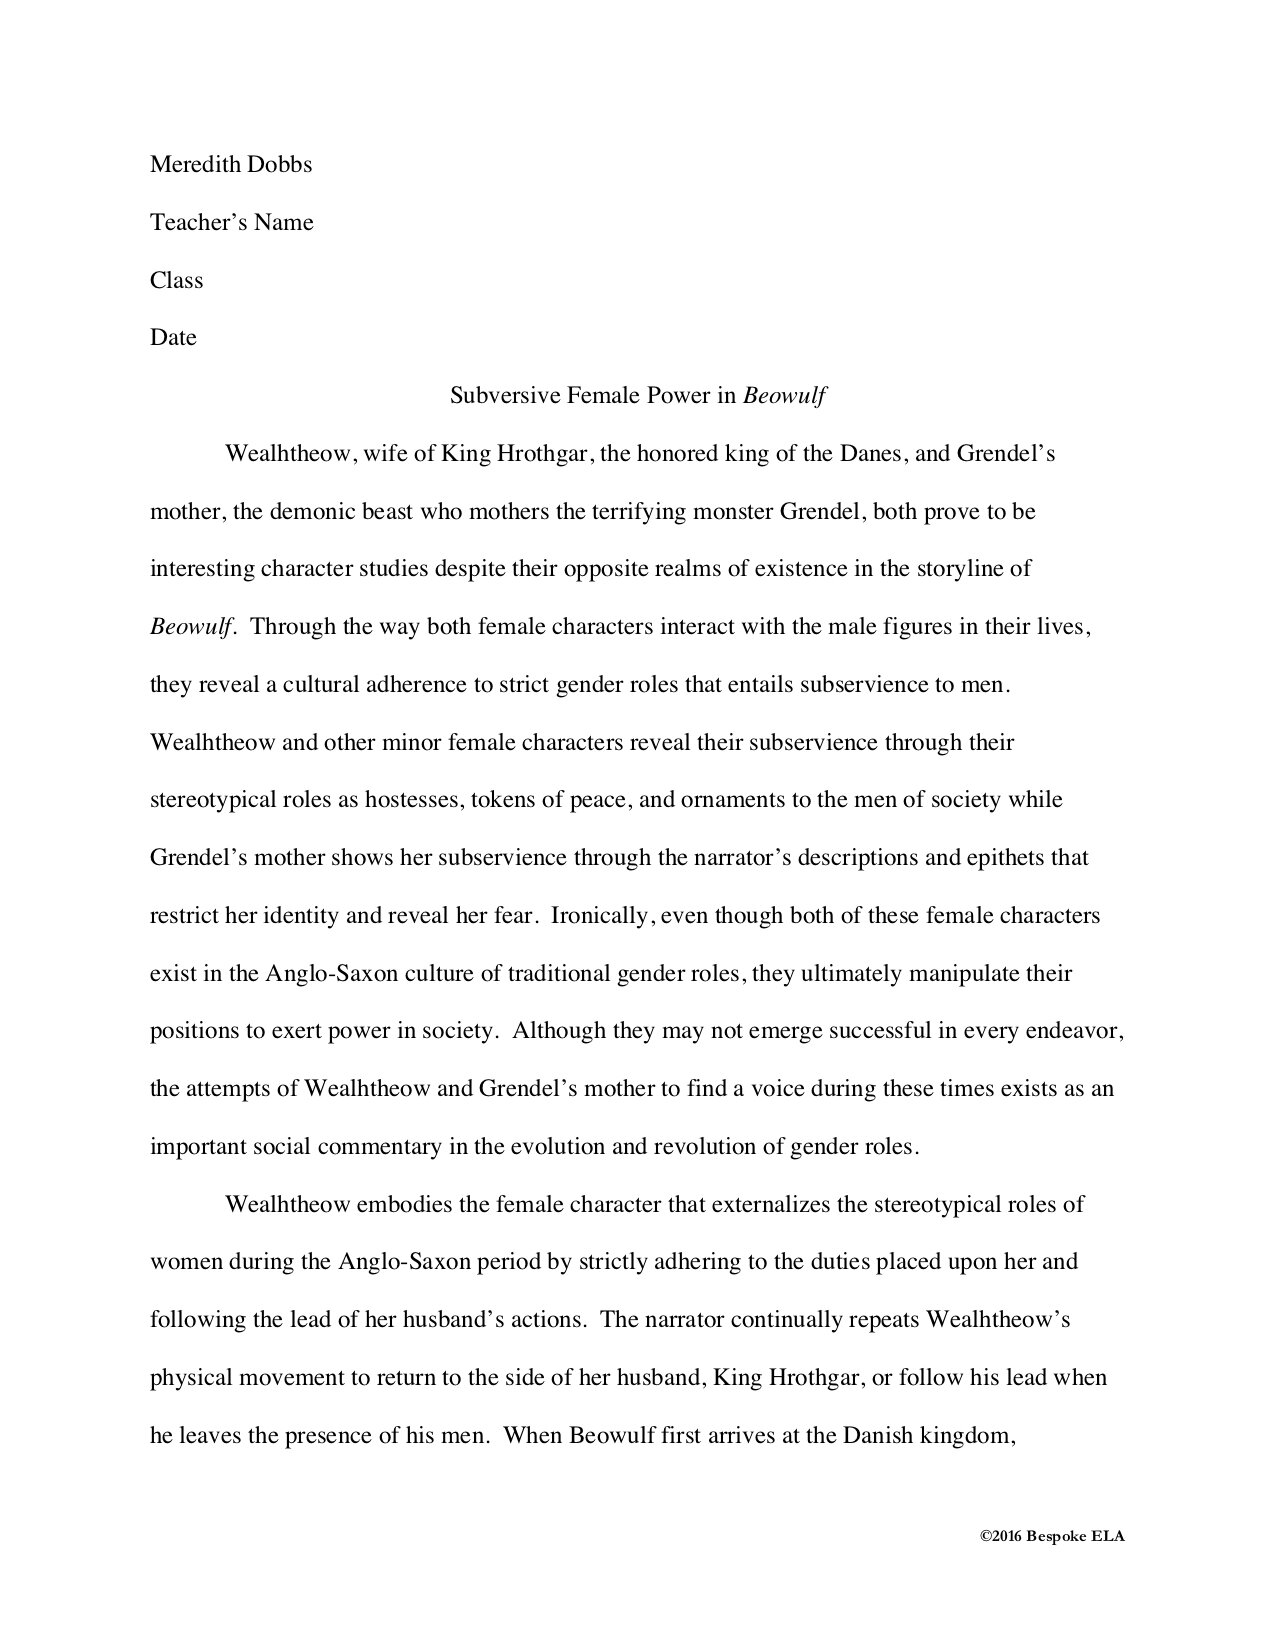 english course review essay